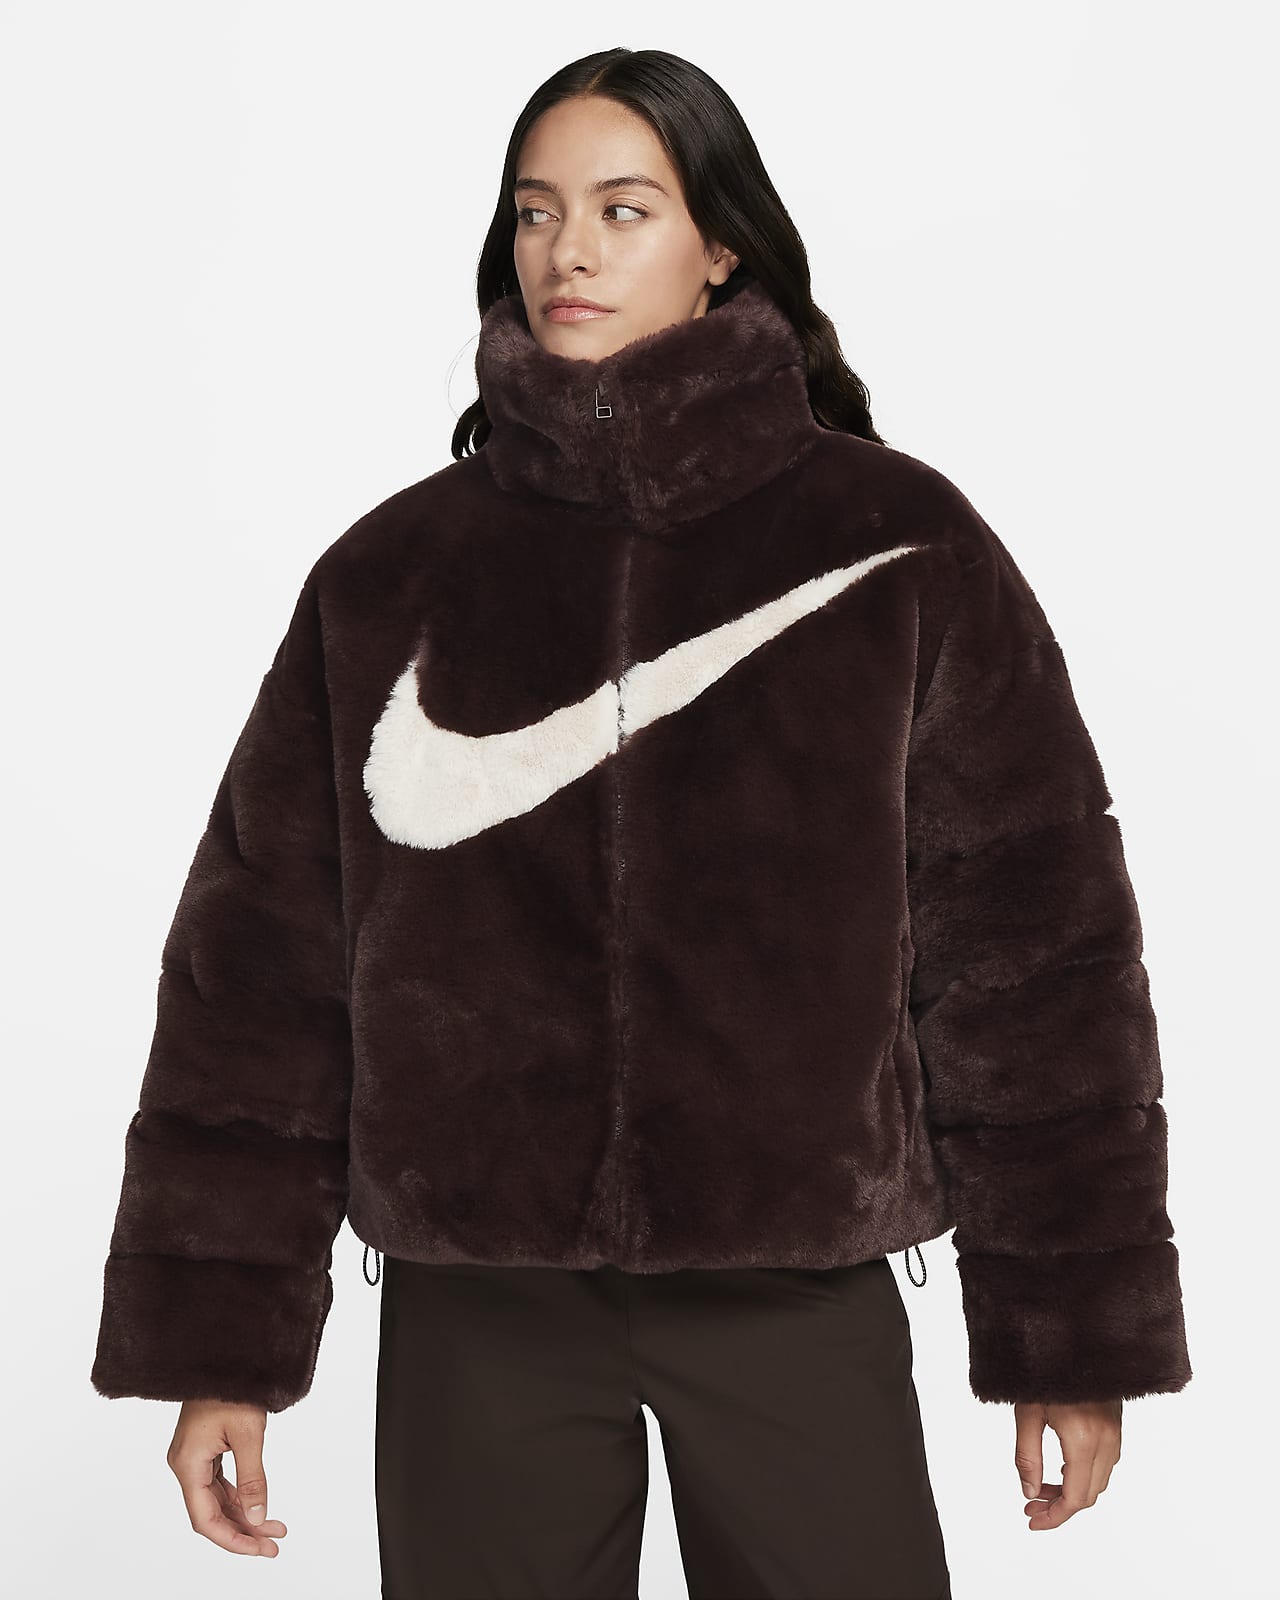 https://static.nike.com/a/images/t_PDP_1280_v1/f_auto,q_auto:eco/fa66d303-e42e-442a-a7a3-b09711114e7c/sportswear-essential-oversized-faux-fur-puffer-wtbf5r.png